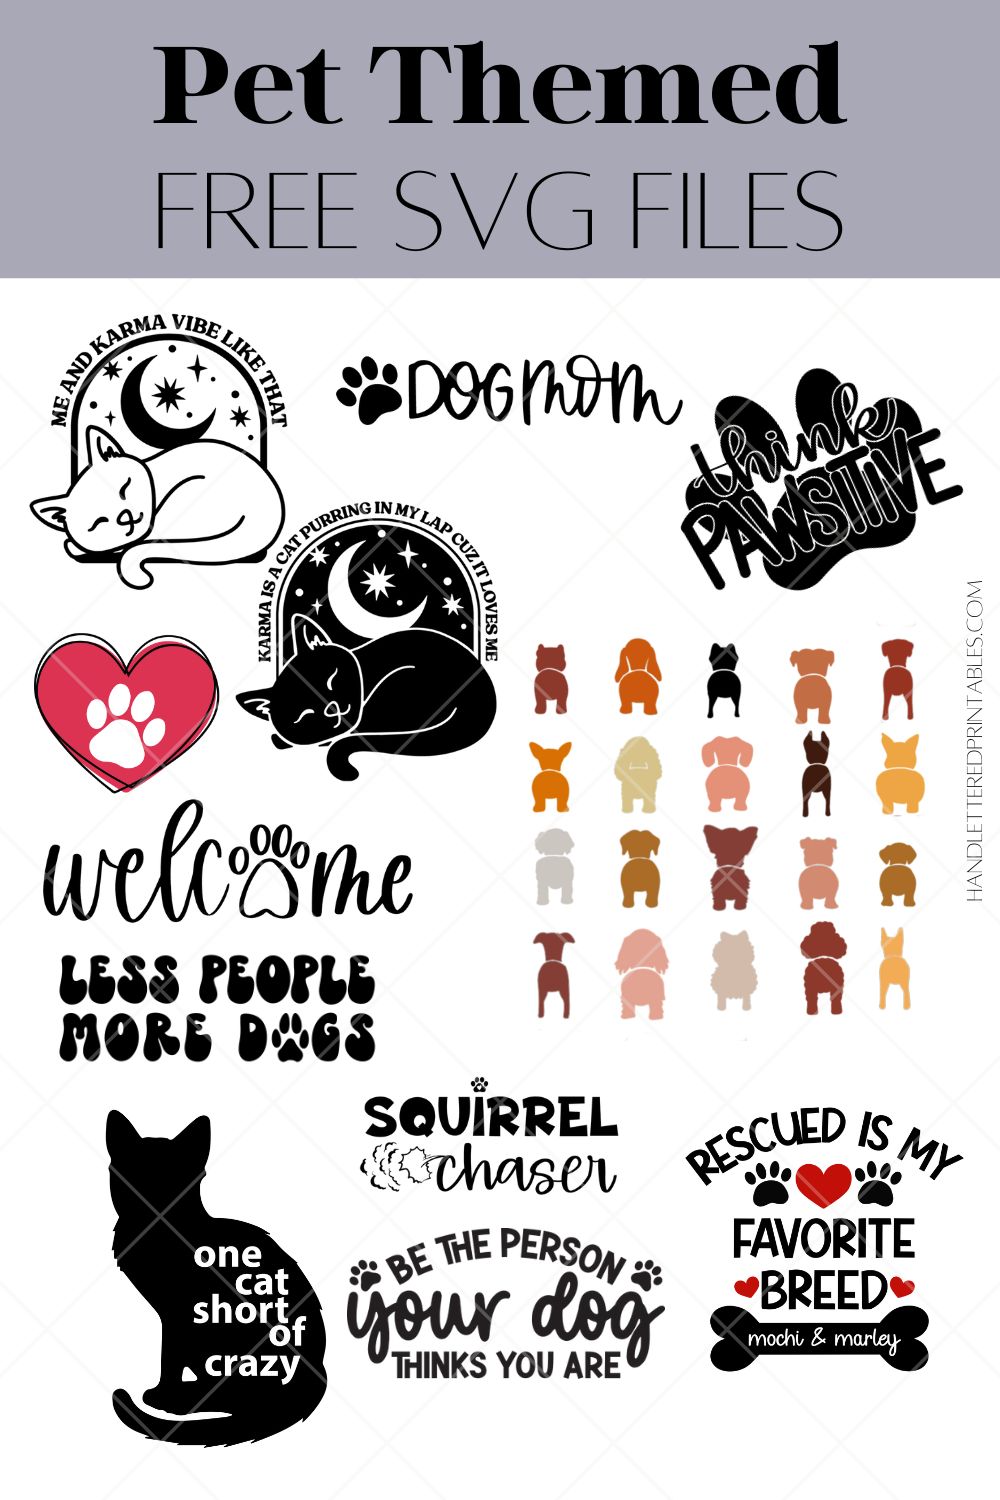 11 free SVG files with a pet theme- collage of all SVG files in the collection